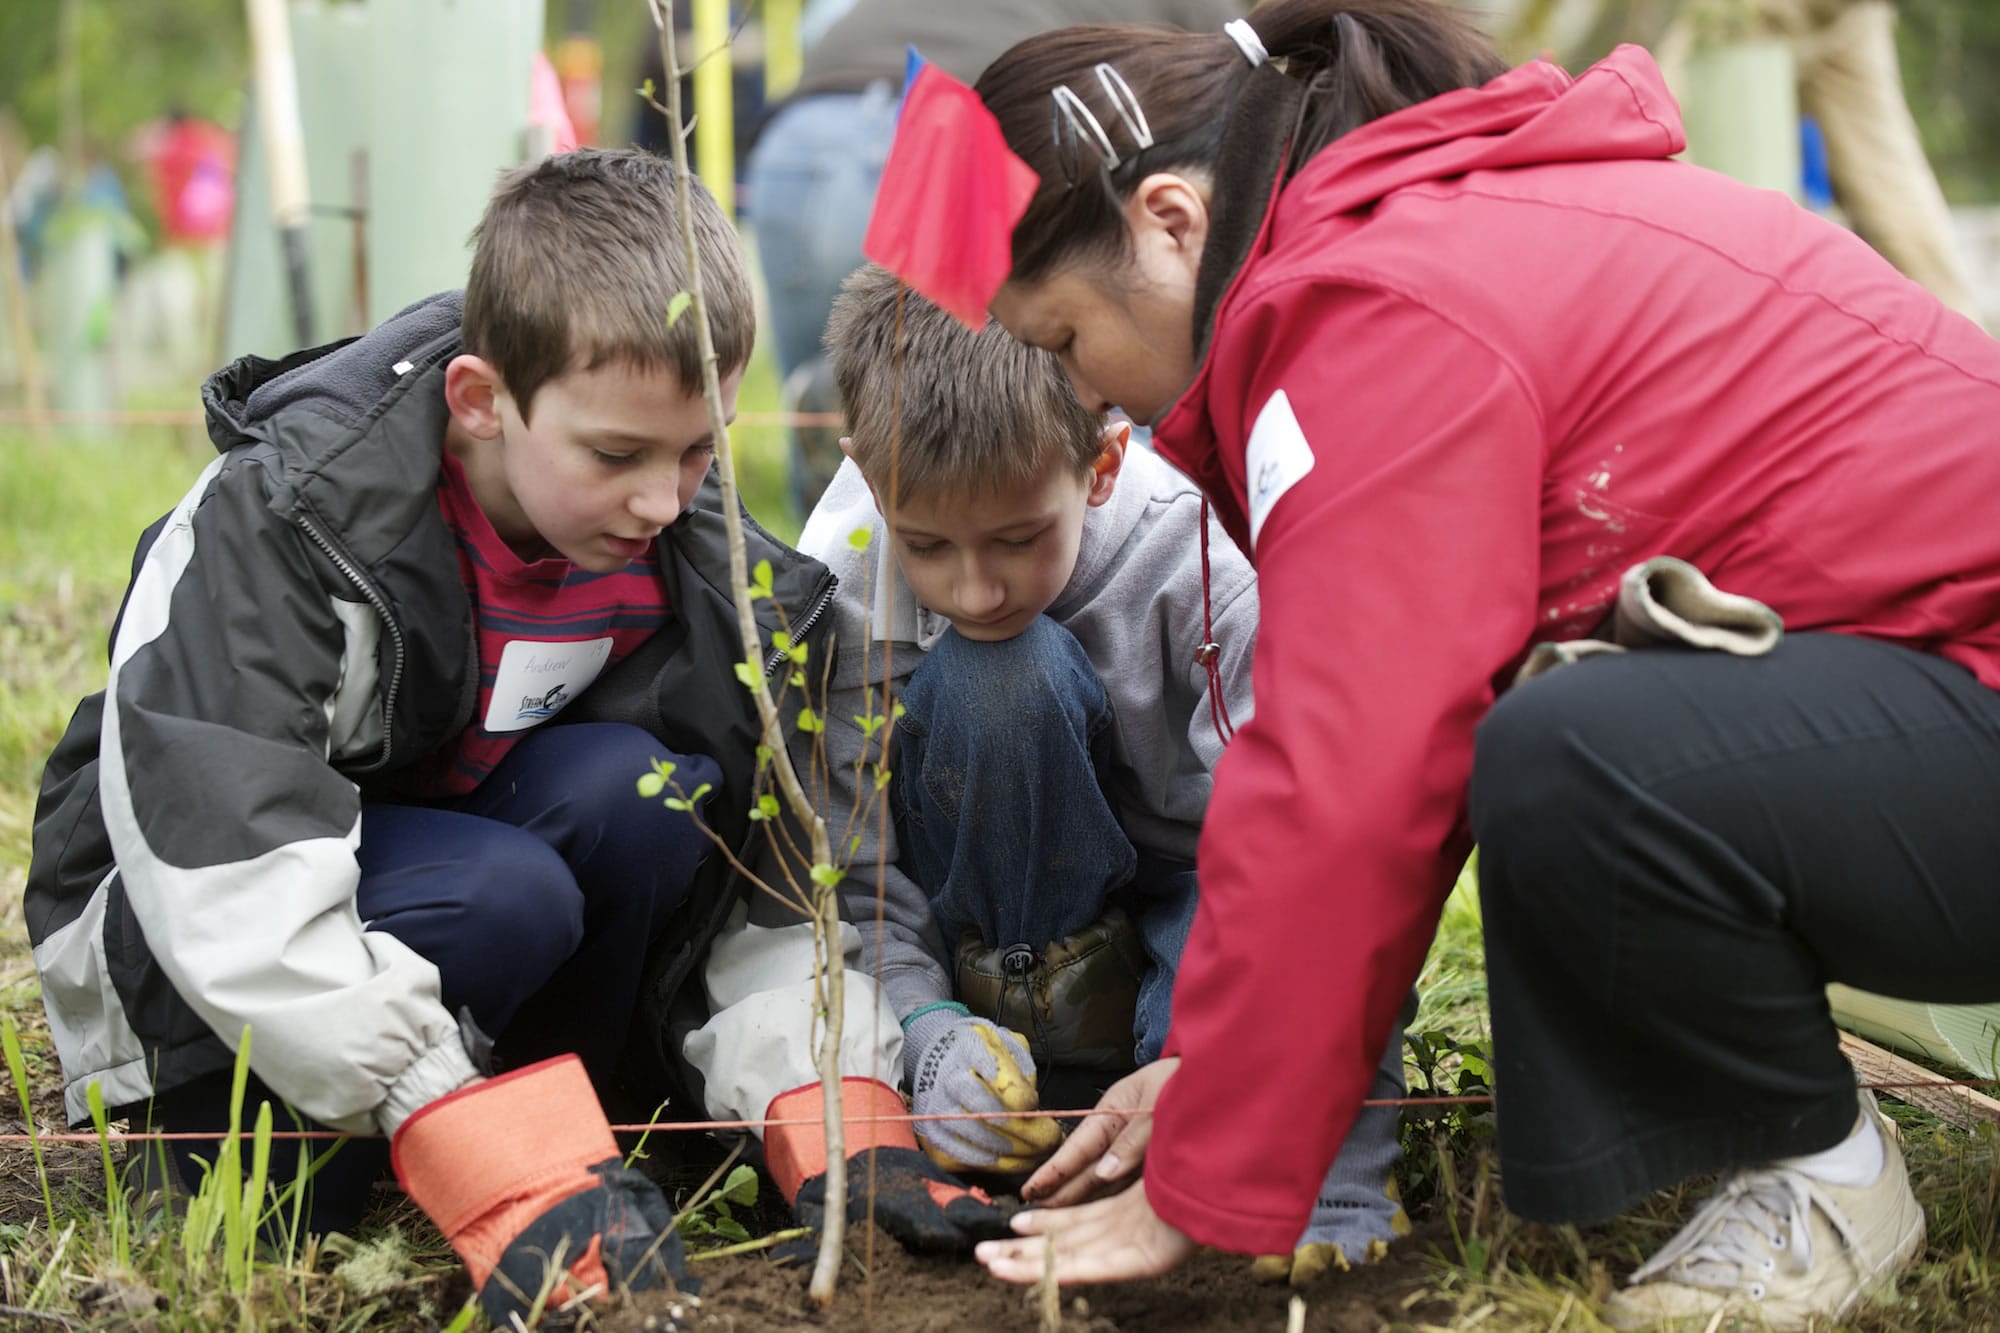 Andrew Field, 9, from left, Dalan Howell, 9, and Heather Gibert of Cub Scout Pack 511, plant a tree on Saturday during the 14th annual eco fair at Salmon Creek Regional Park.